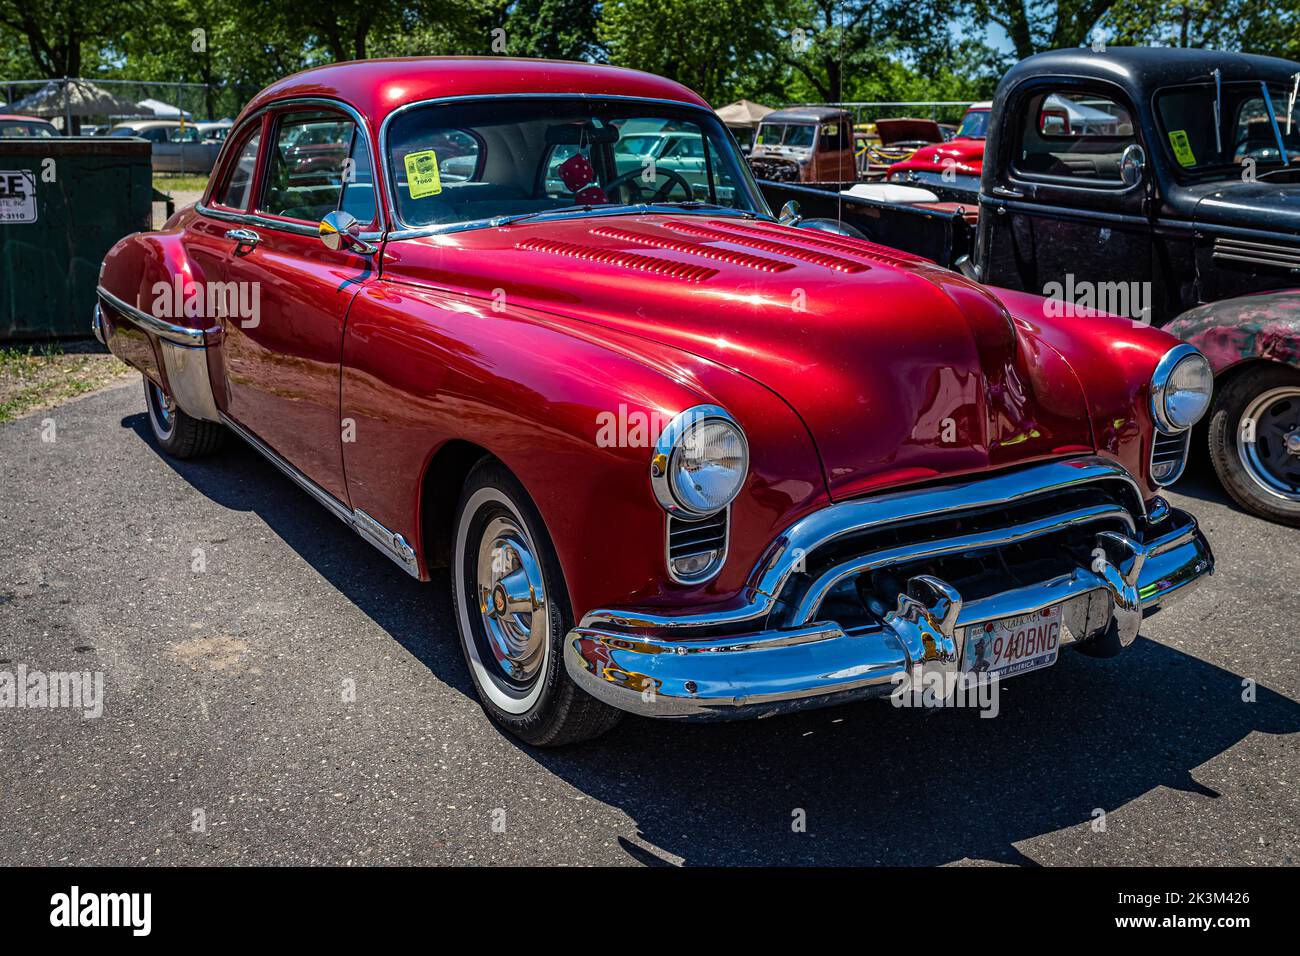 Falcon Heights, MN - June 18, 2022: High perspective front corner view of a 1949 Oldsmobile Rocket 88 Coupe at a local car show. Stock Photo